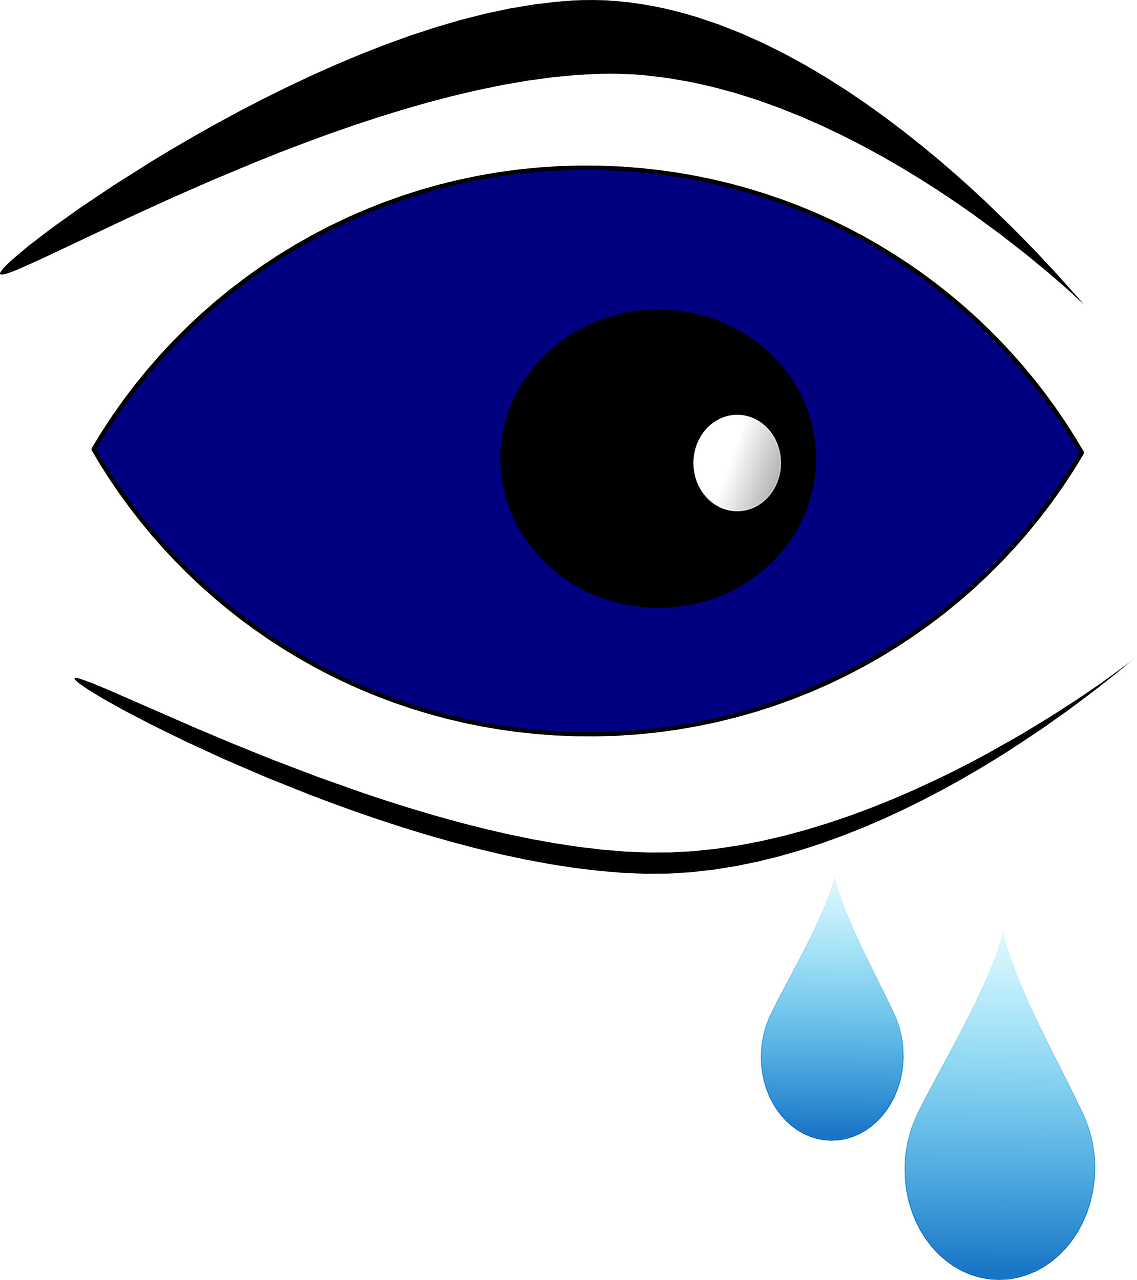 a blue eye with a tear coming out of it, inspired by Eizō Katō, hurufiyya, weeping tears of black oil, svg illustration, monsoon, with a black background